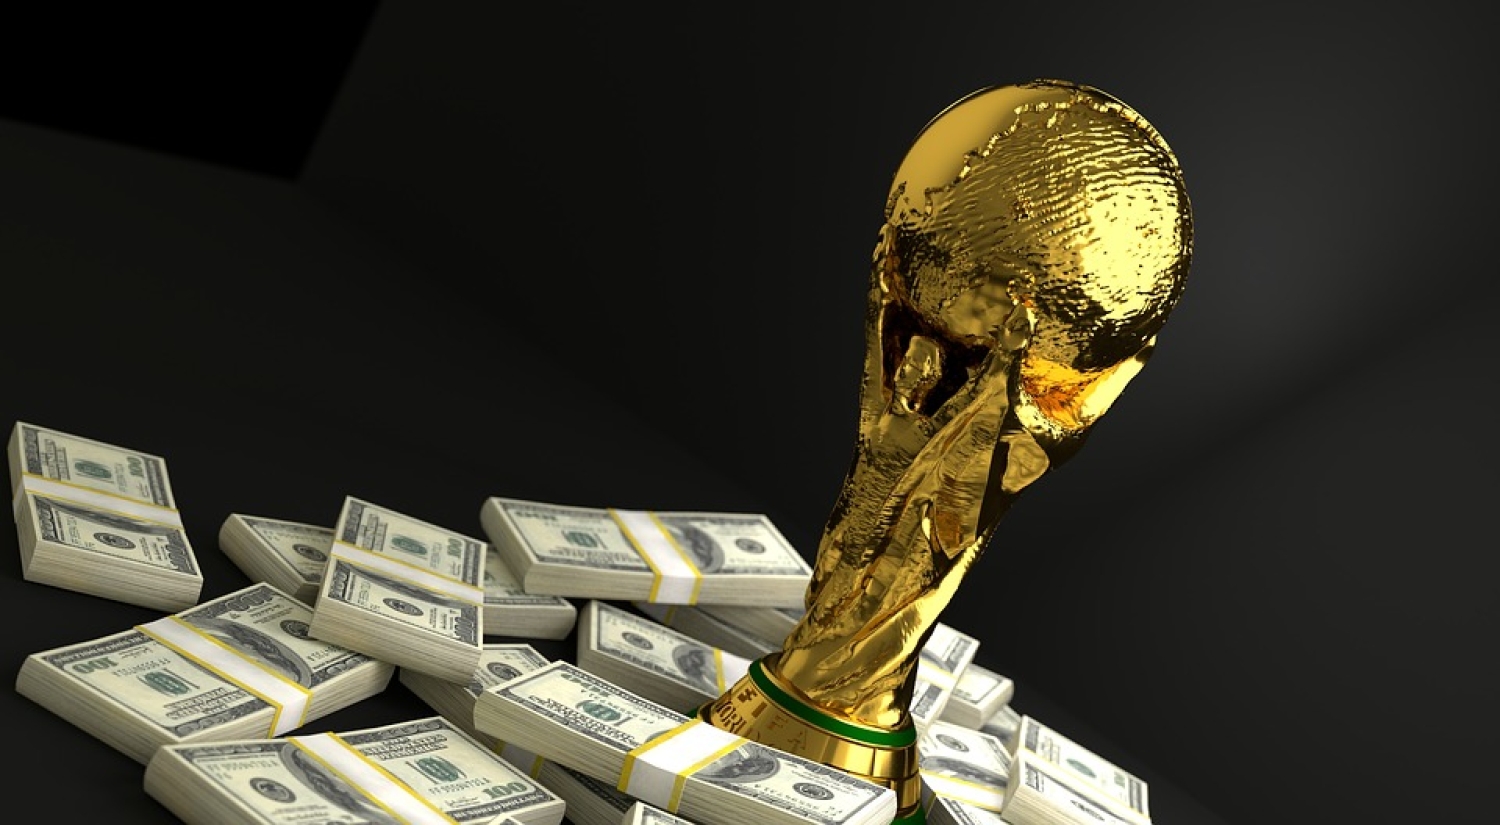 Qatar World Cup to generate $4 billion revenue opportunity from tourist spends in Middle East